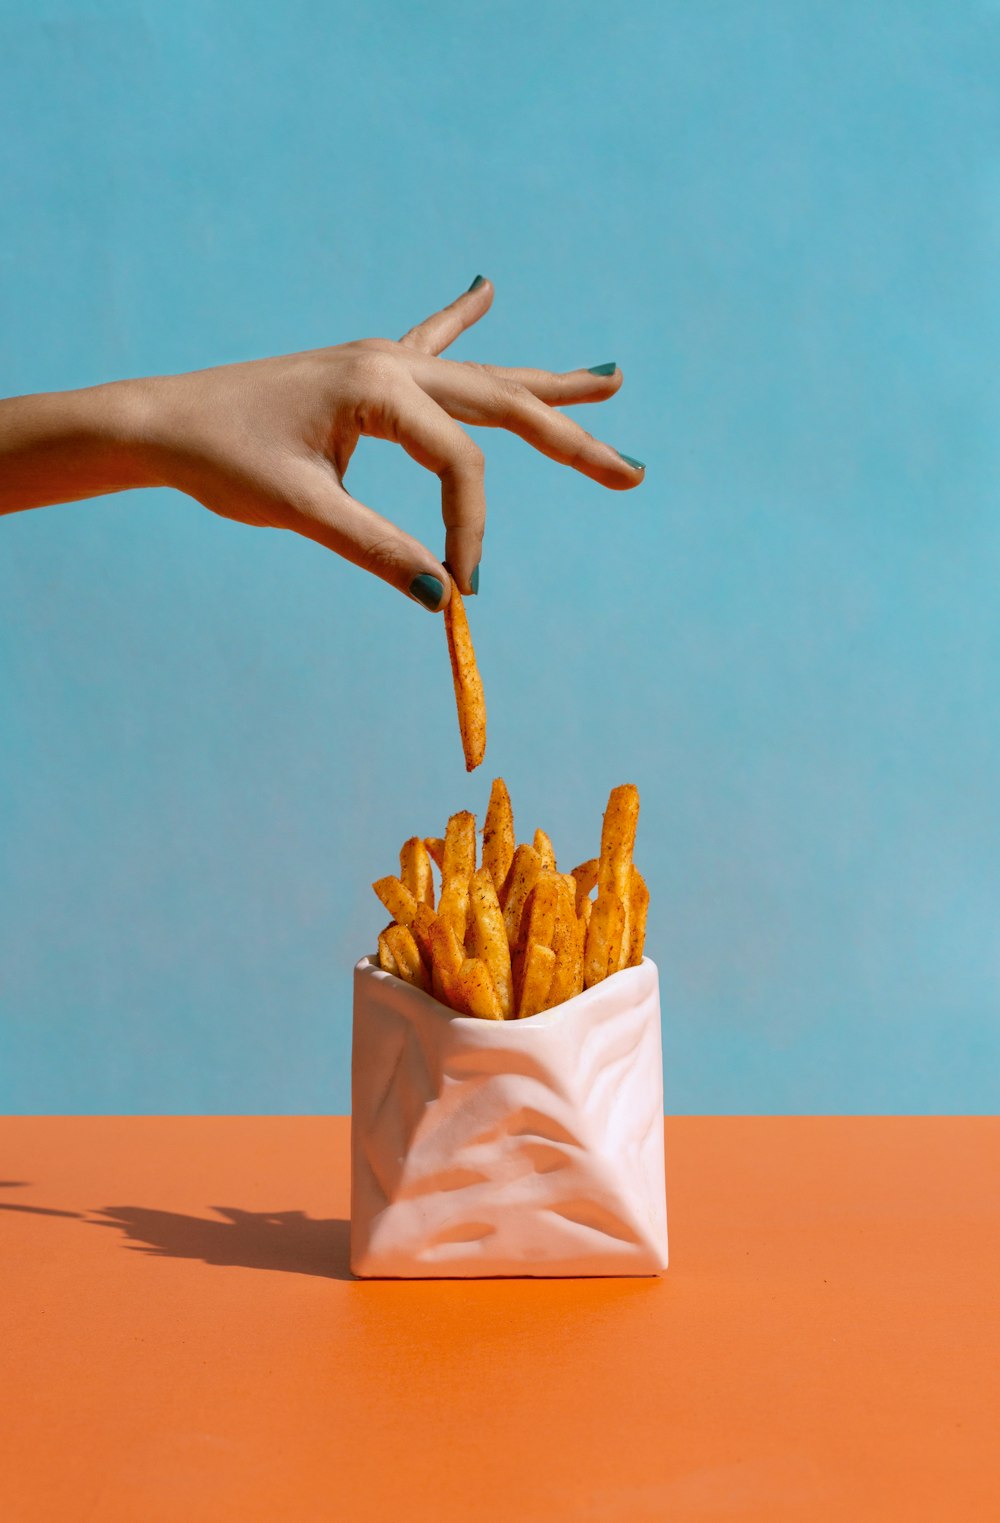 a hand reaching for a bag of french fries